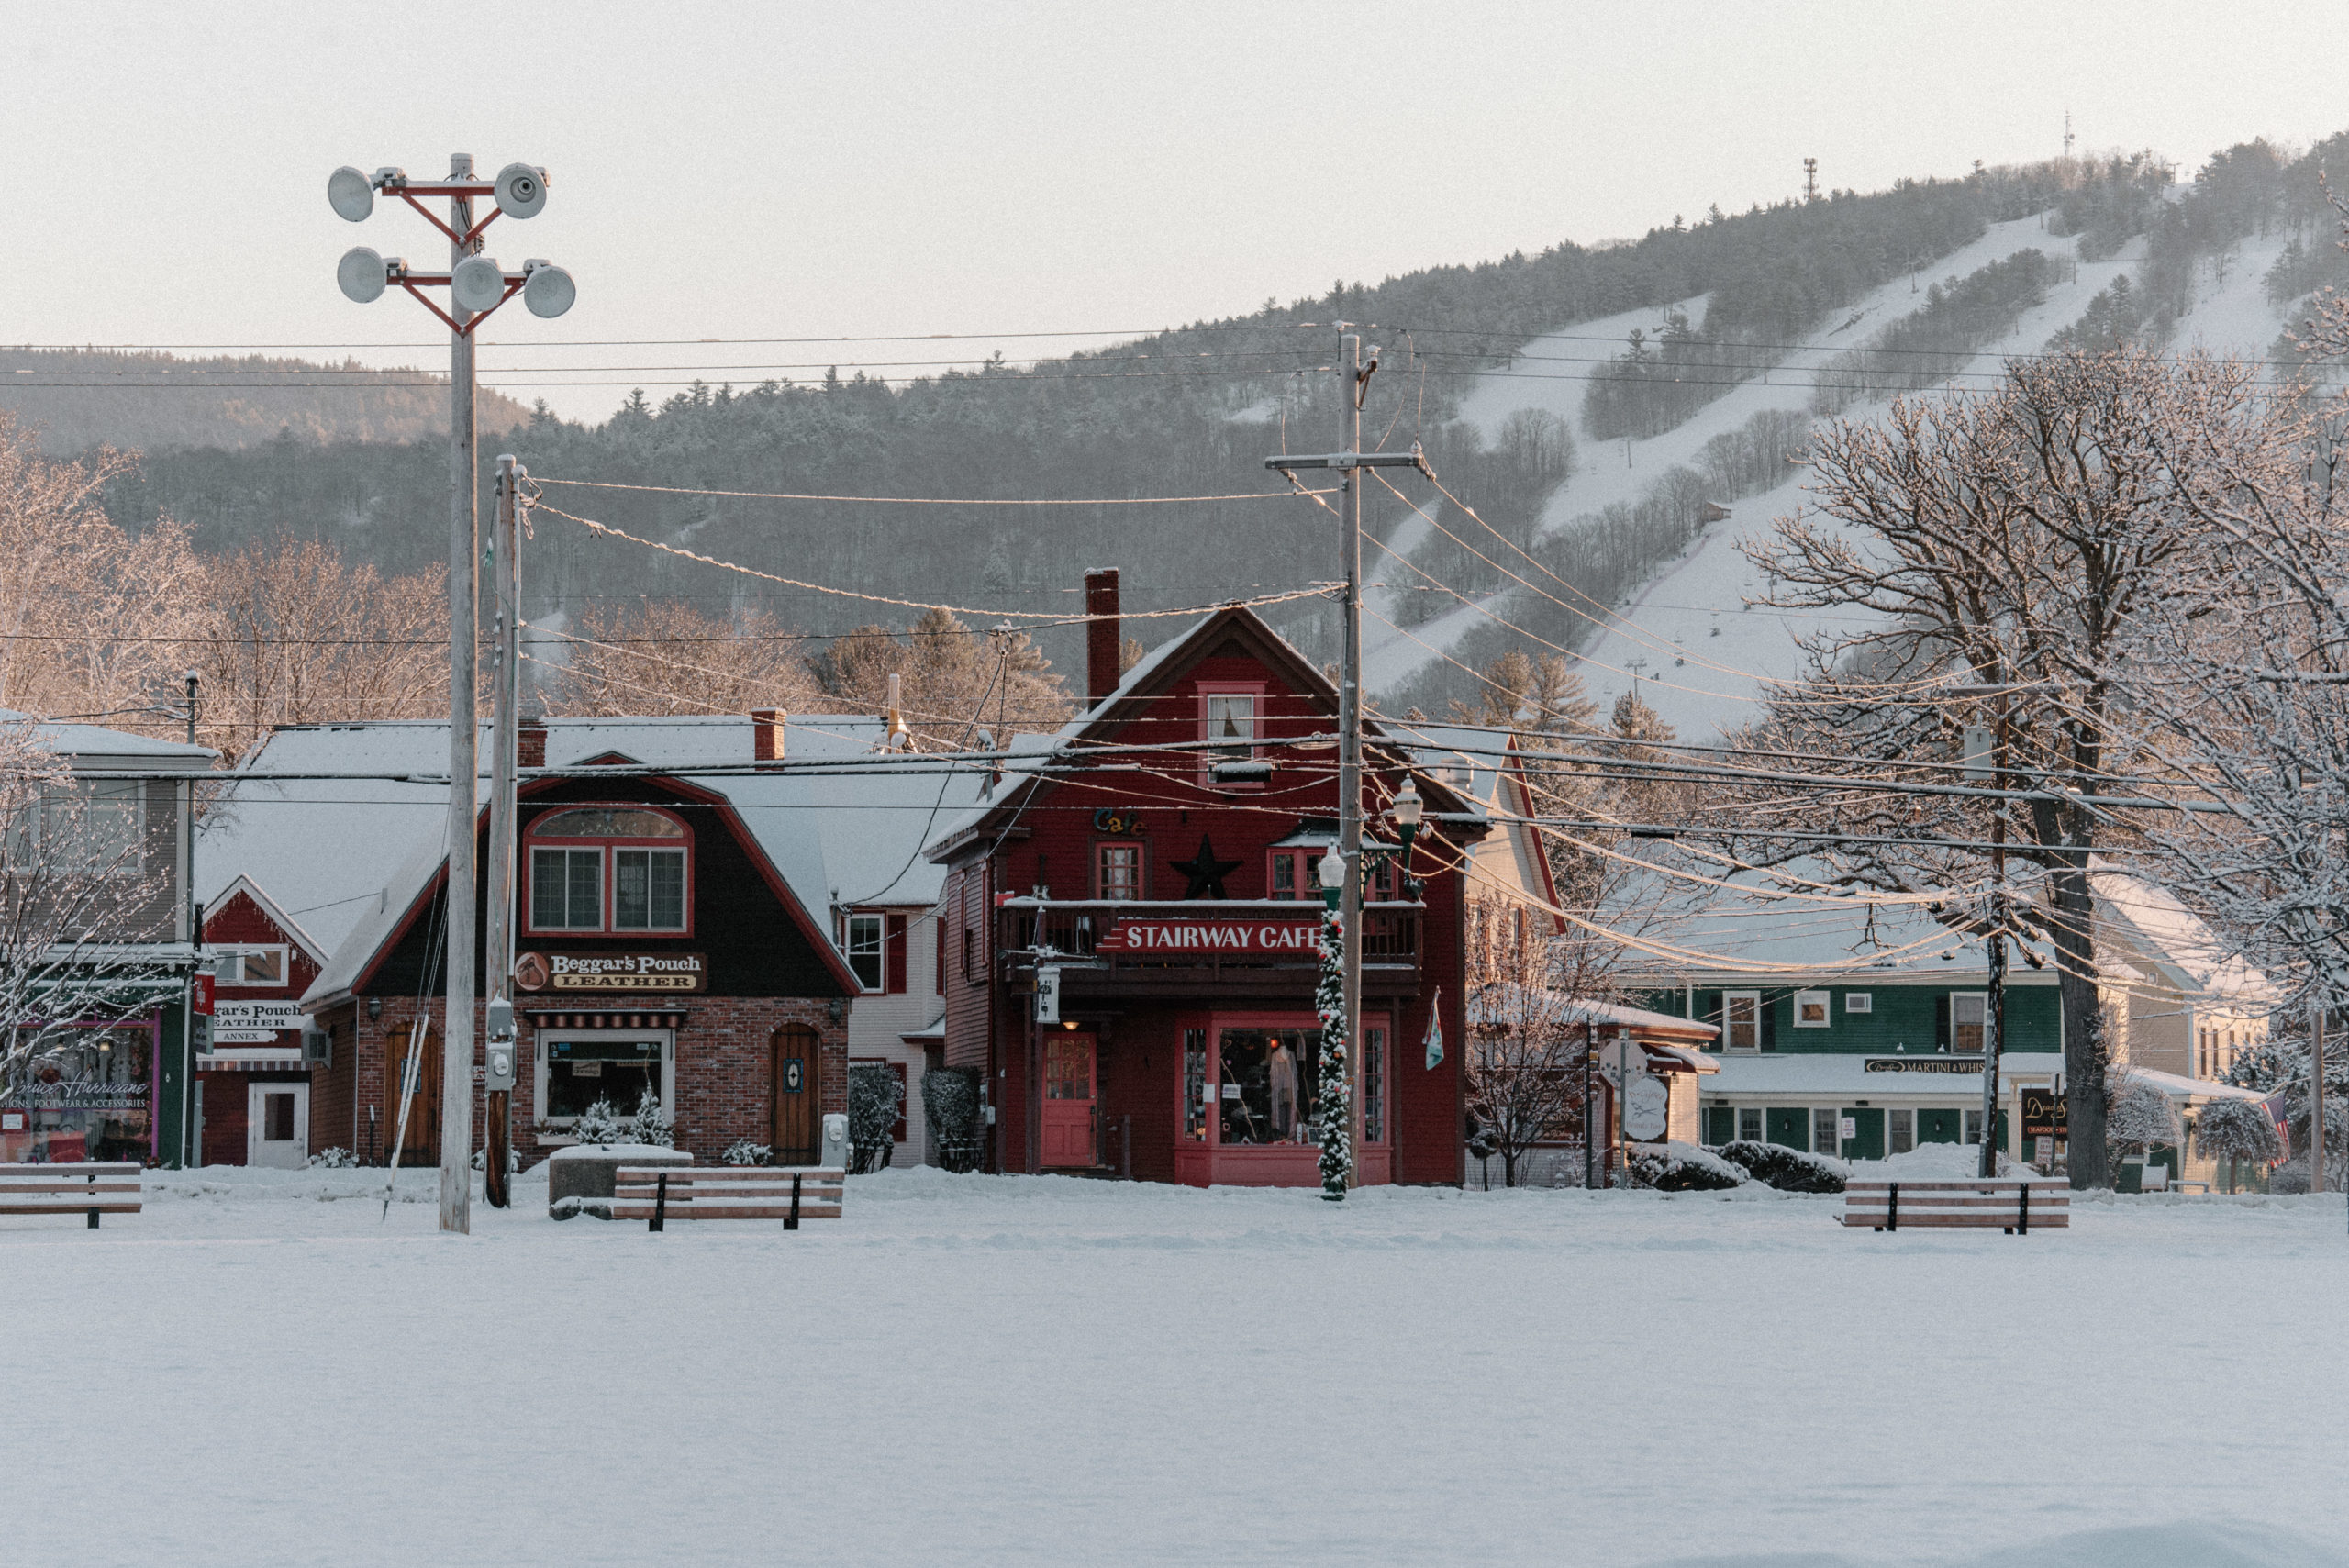 A complete guide to eloping in the White Mountains of NH would not be complete without a stop in North Conway.